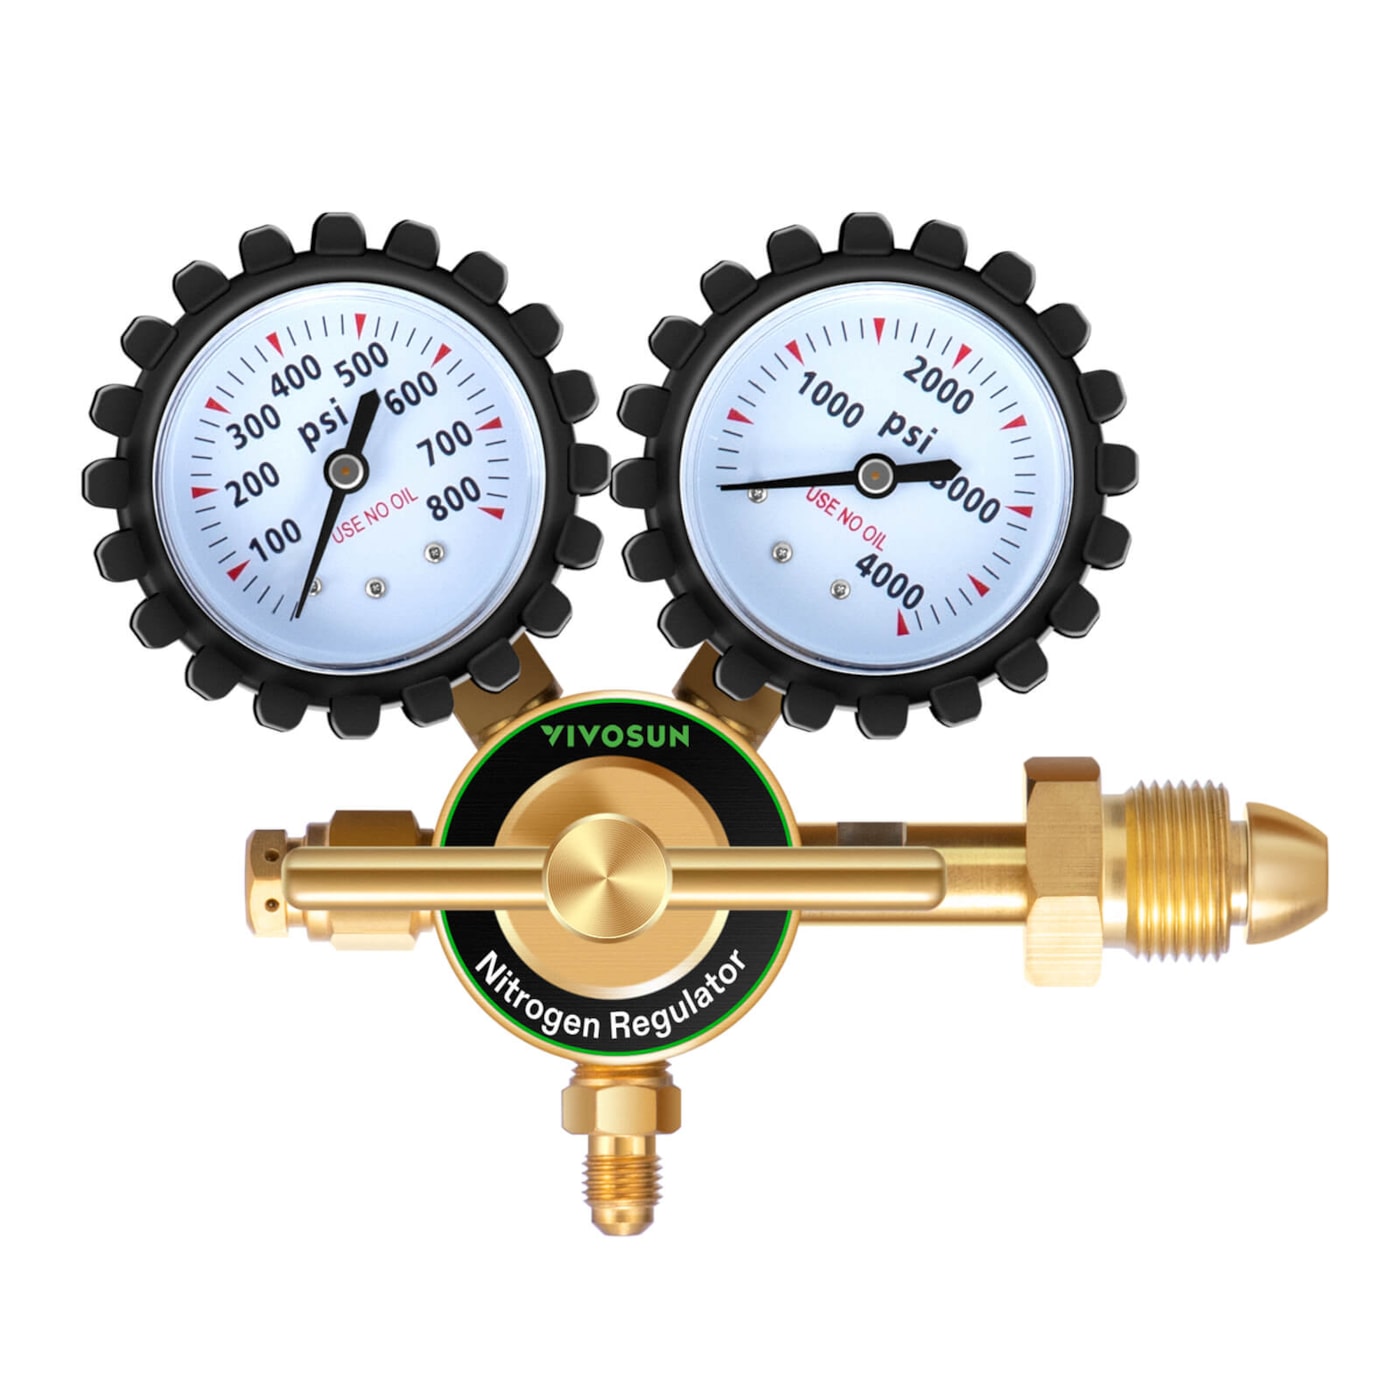 VIVOSUN Nitrogen Regulator with CGA580 Inlet and 7/16'' UNF Outlet Connection, Heavy-Duty Handle Helium Regulator with Double Pressure Gauge,0-800Psi Low Pressure Gauge and 0-4000psi High Pressure Gauge